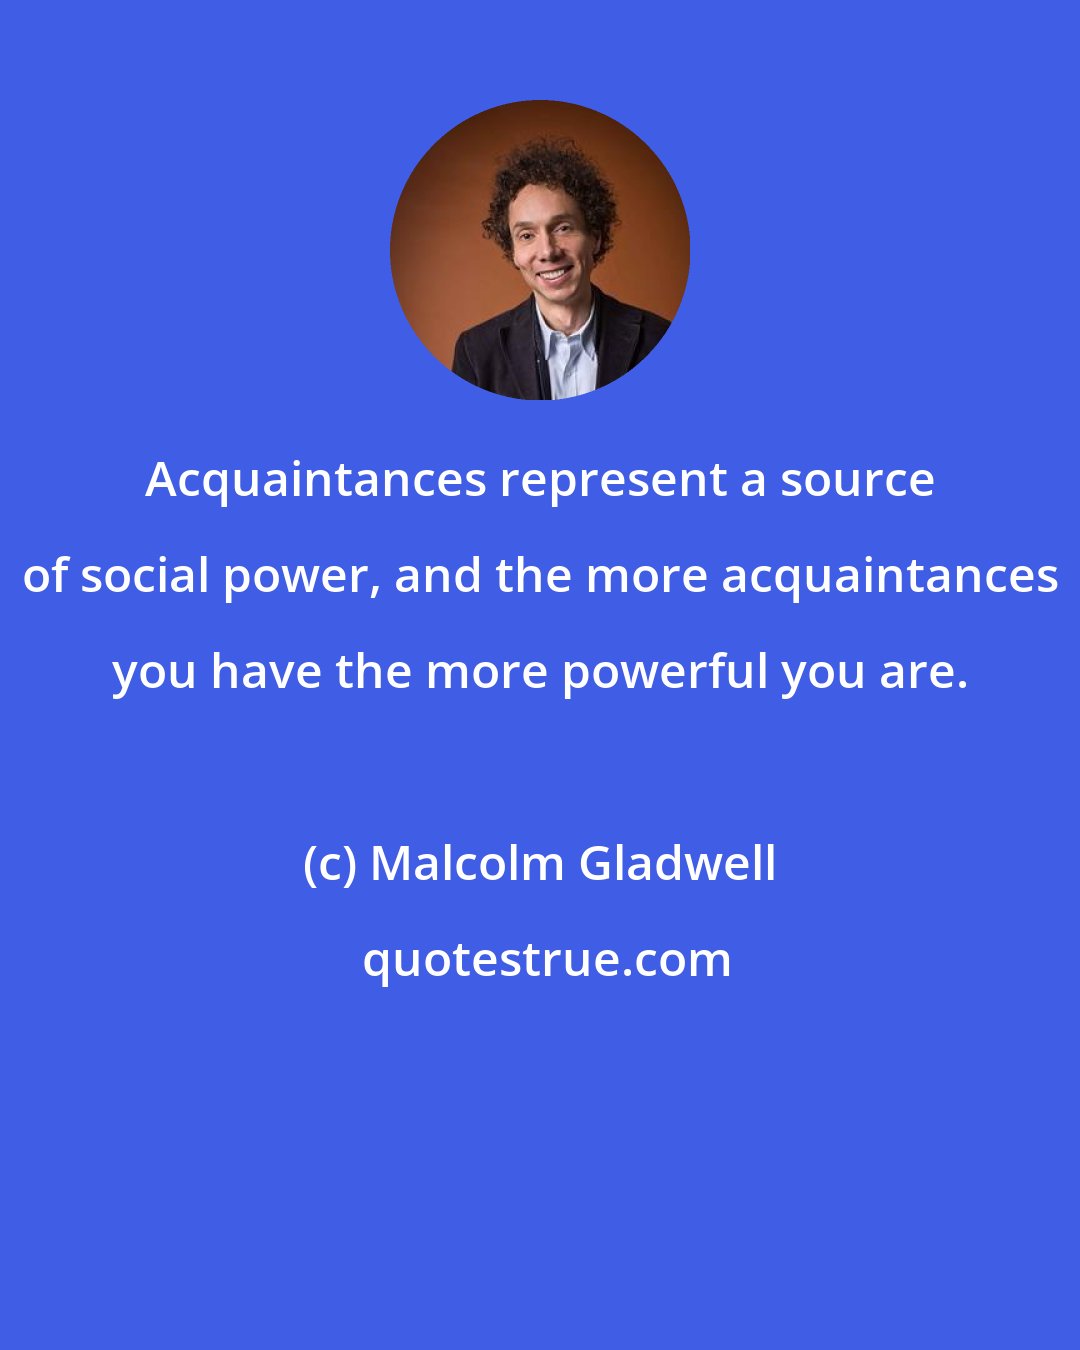 Malcolm Gladwell: Acquaintances represent a source of social power, and the more acquaintances you have the more powerful you are.